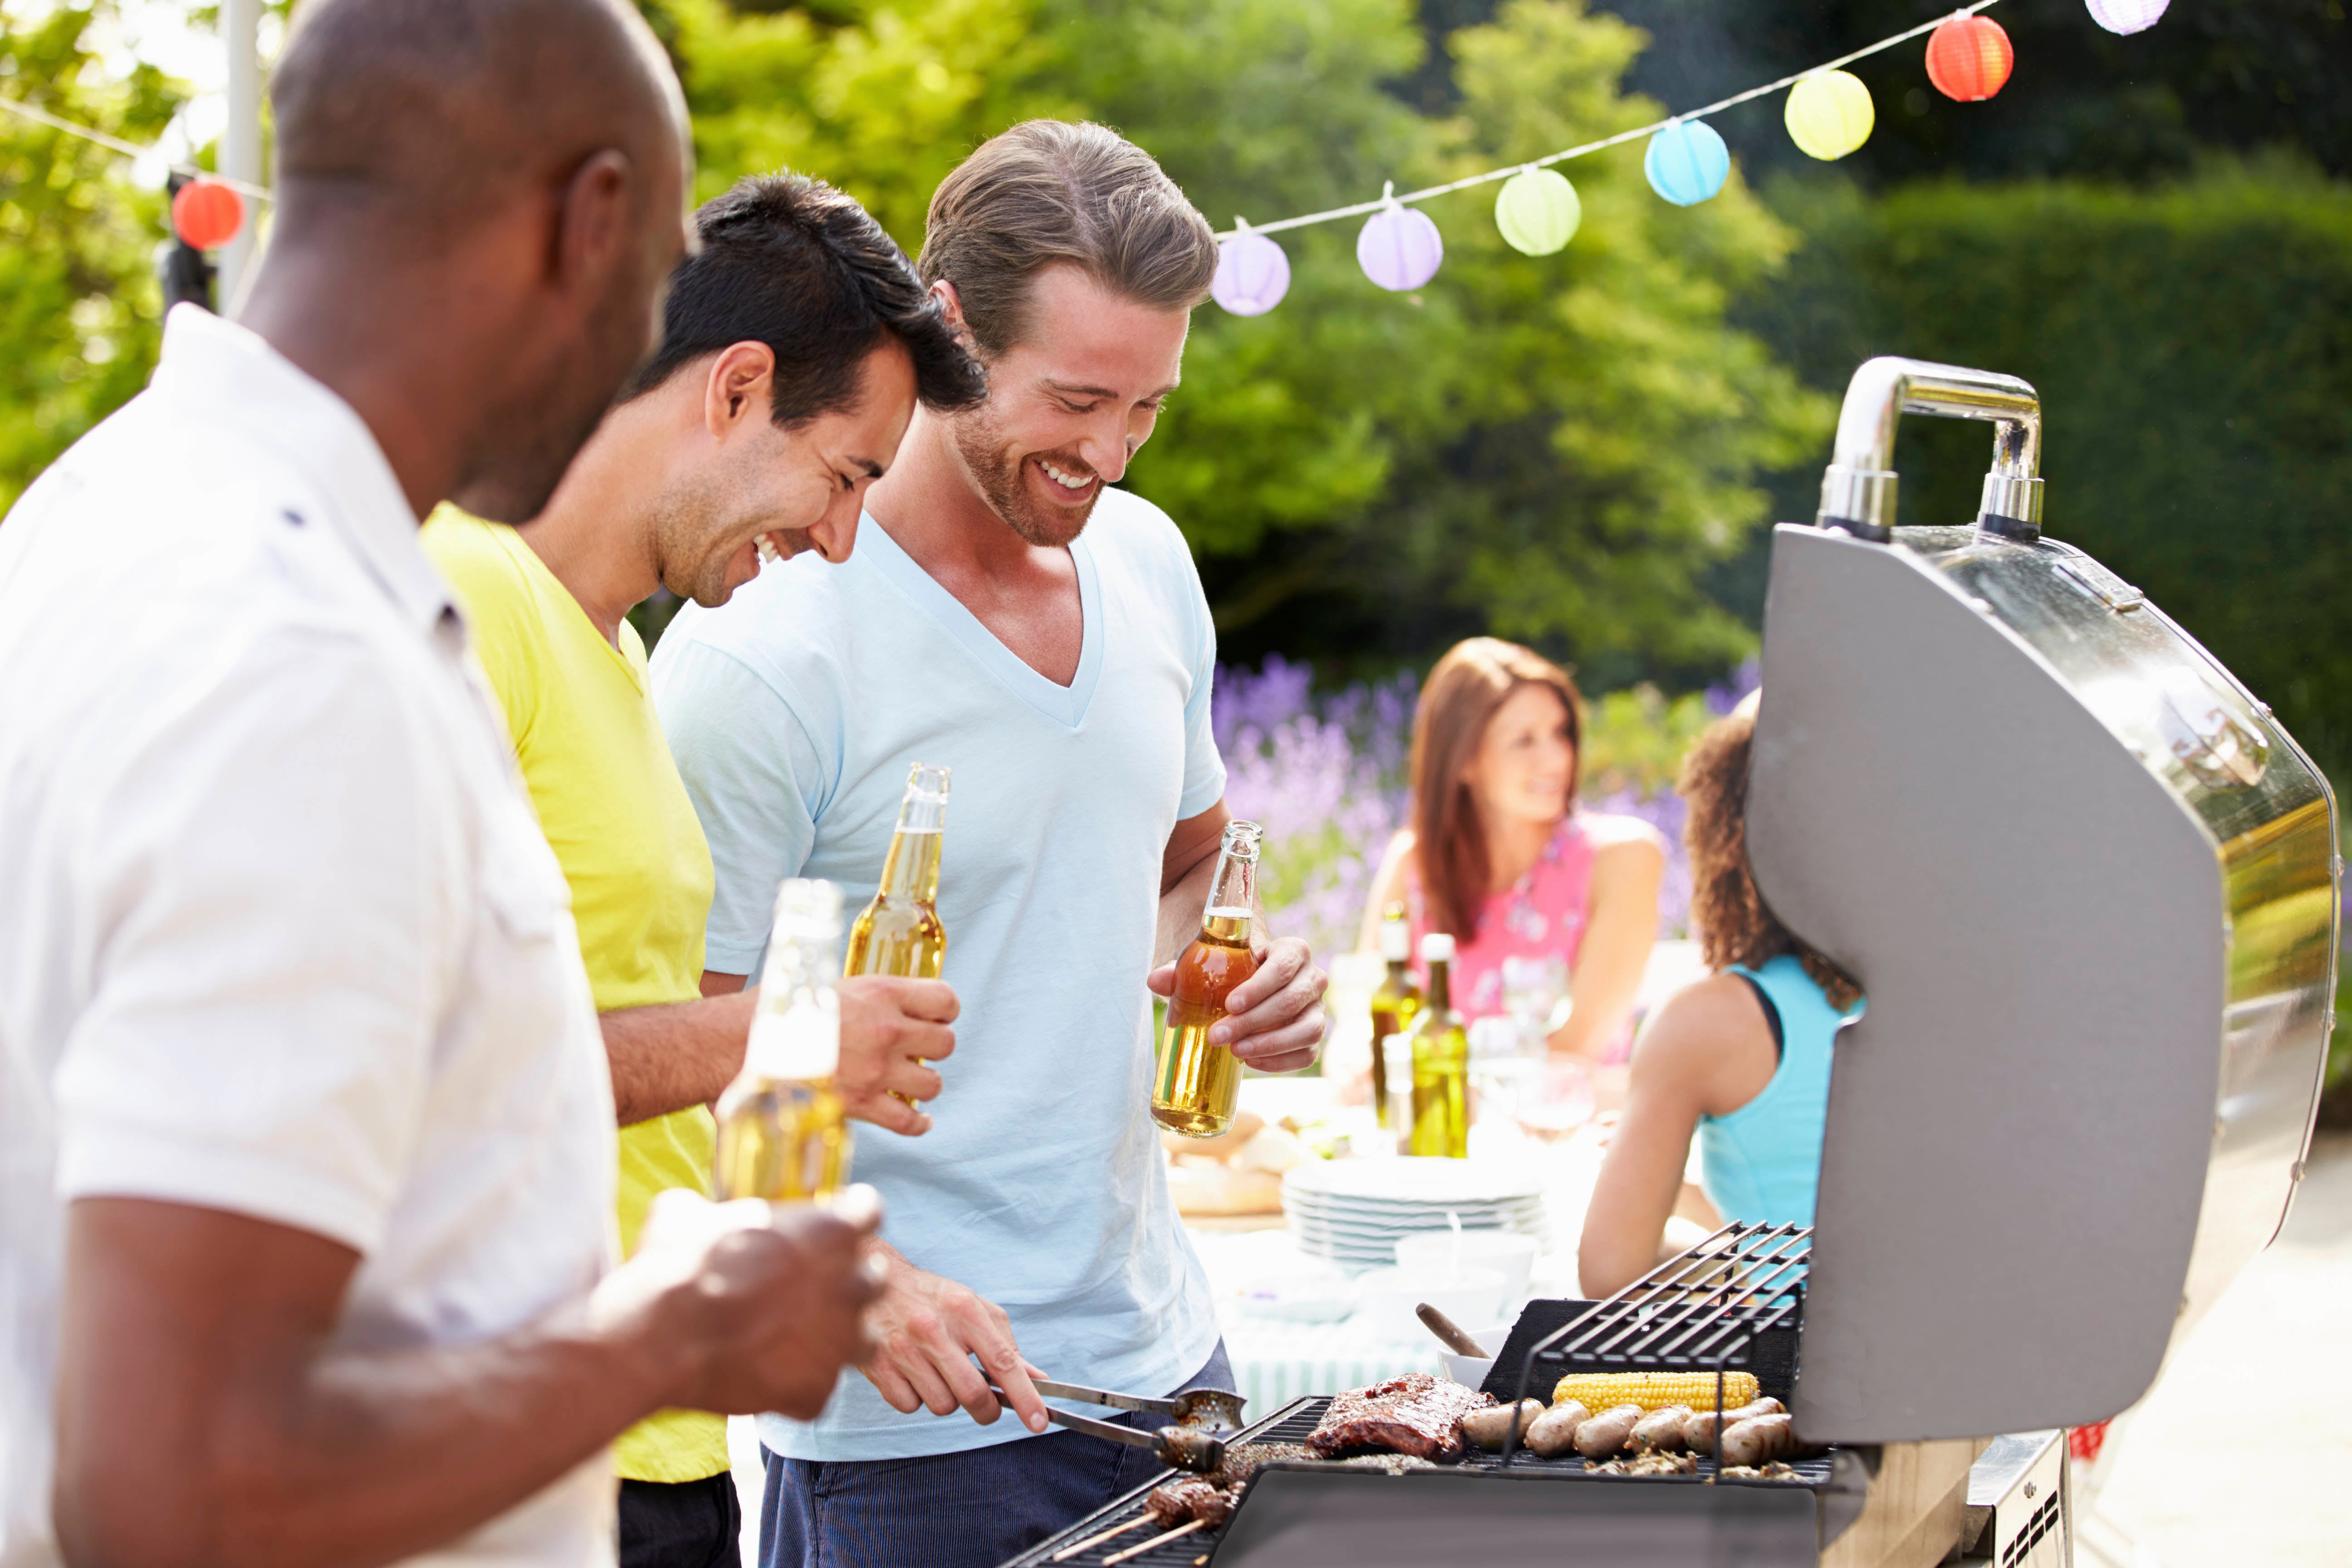 Residents grilling at The Mark by Solaire in Alexandria, Virginia